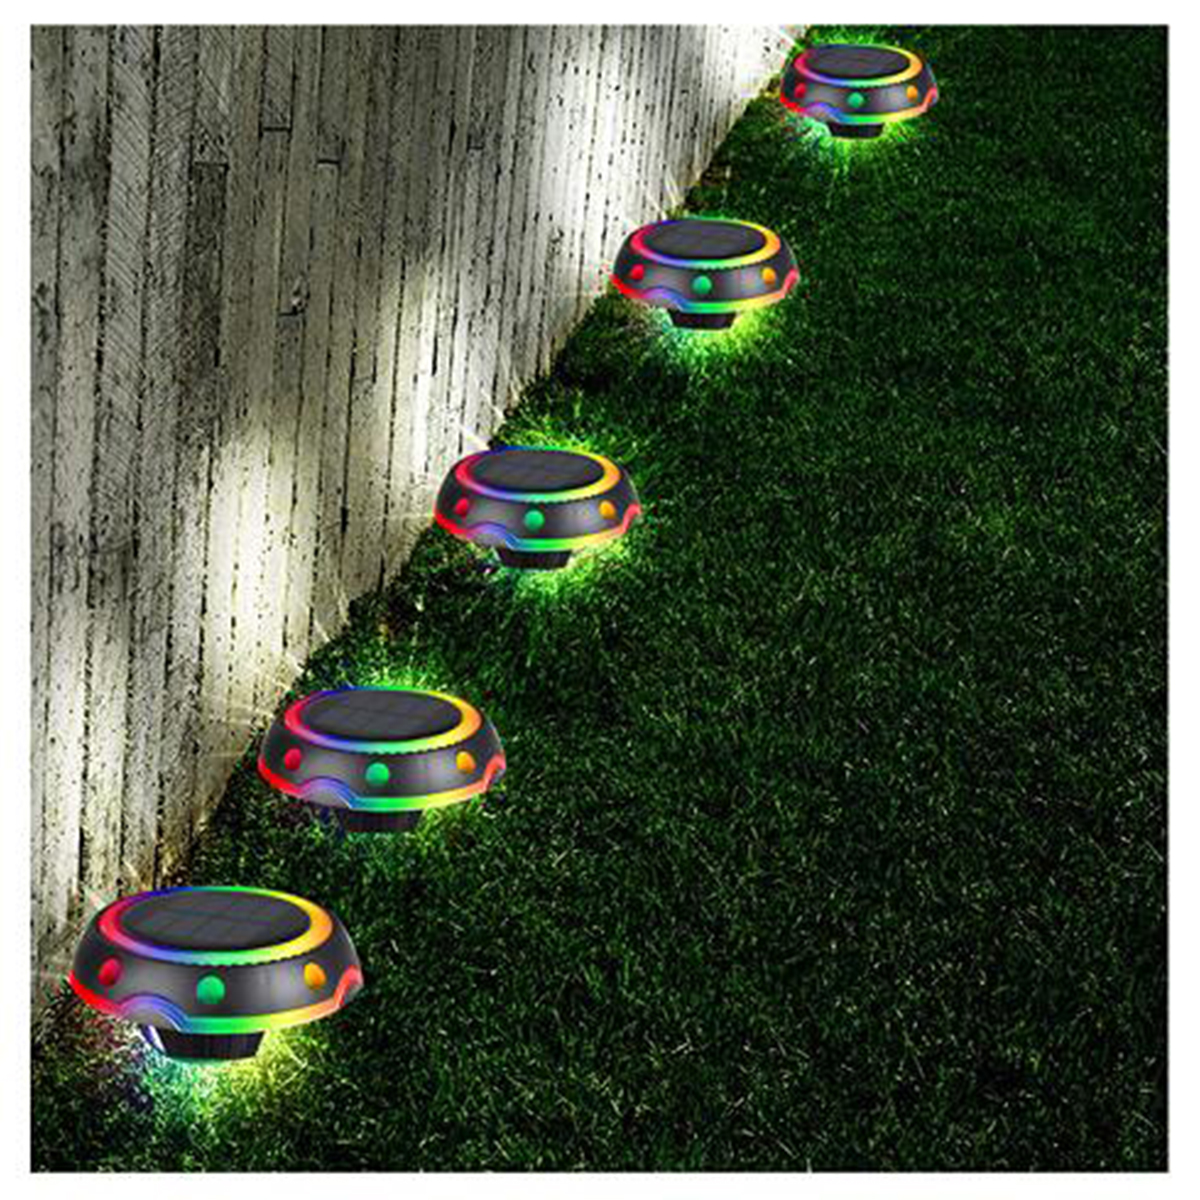 RGB-LED-Solar-Light-Colour-Changing-Ground-Buried-Garden-Lawn-Path-Outdoor-Lamp-1823442-6